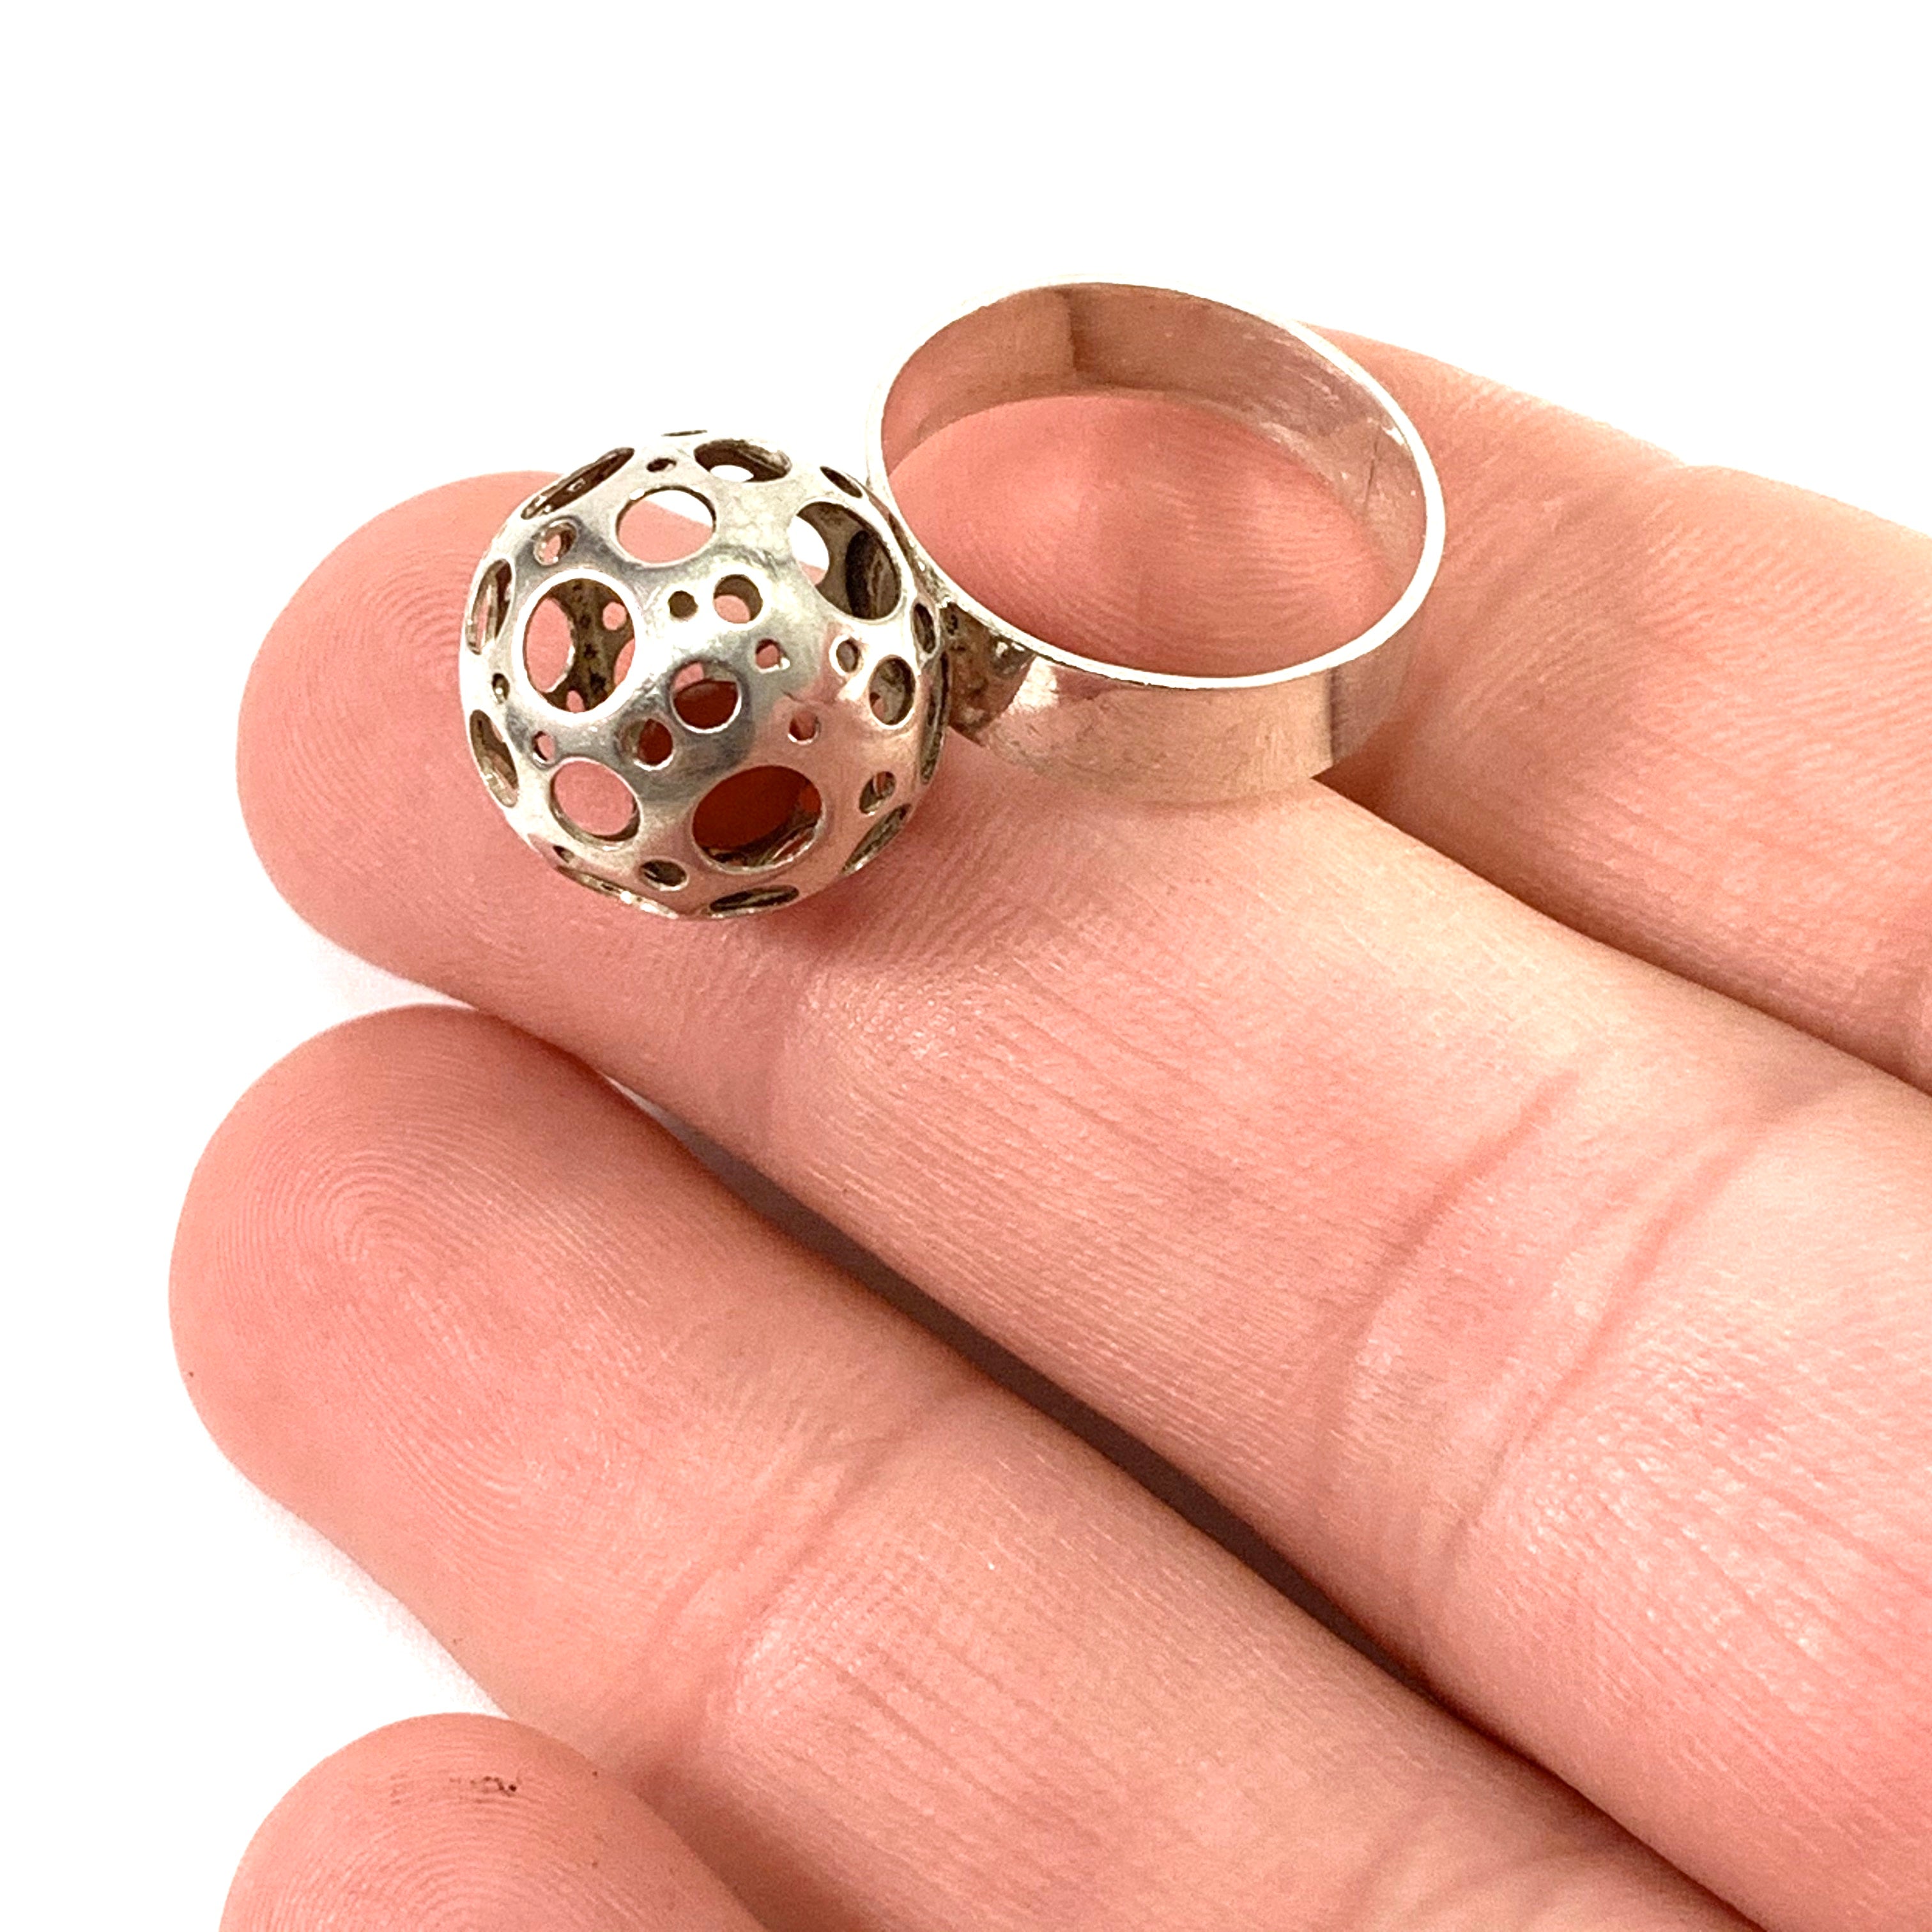 Liisa Vitali for N Westerback, Finland year 1973 Sterling Silver Trapped Carnelian Sphere Ring.